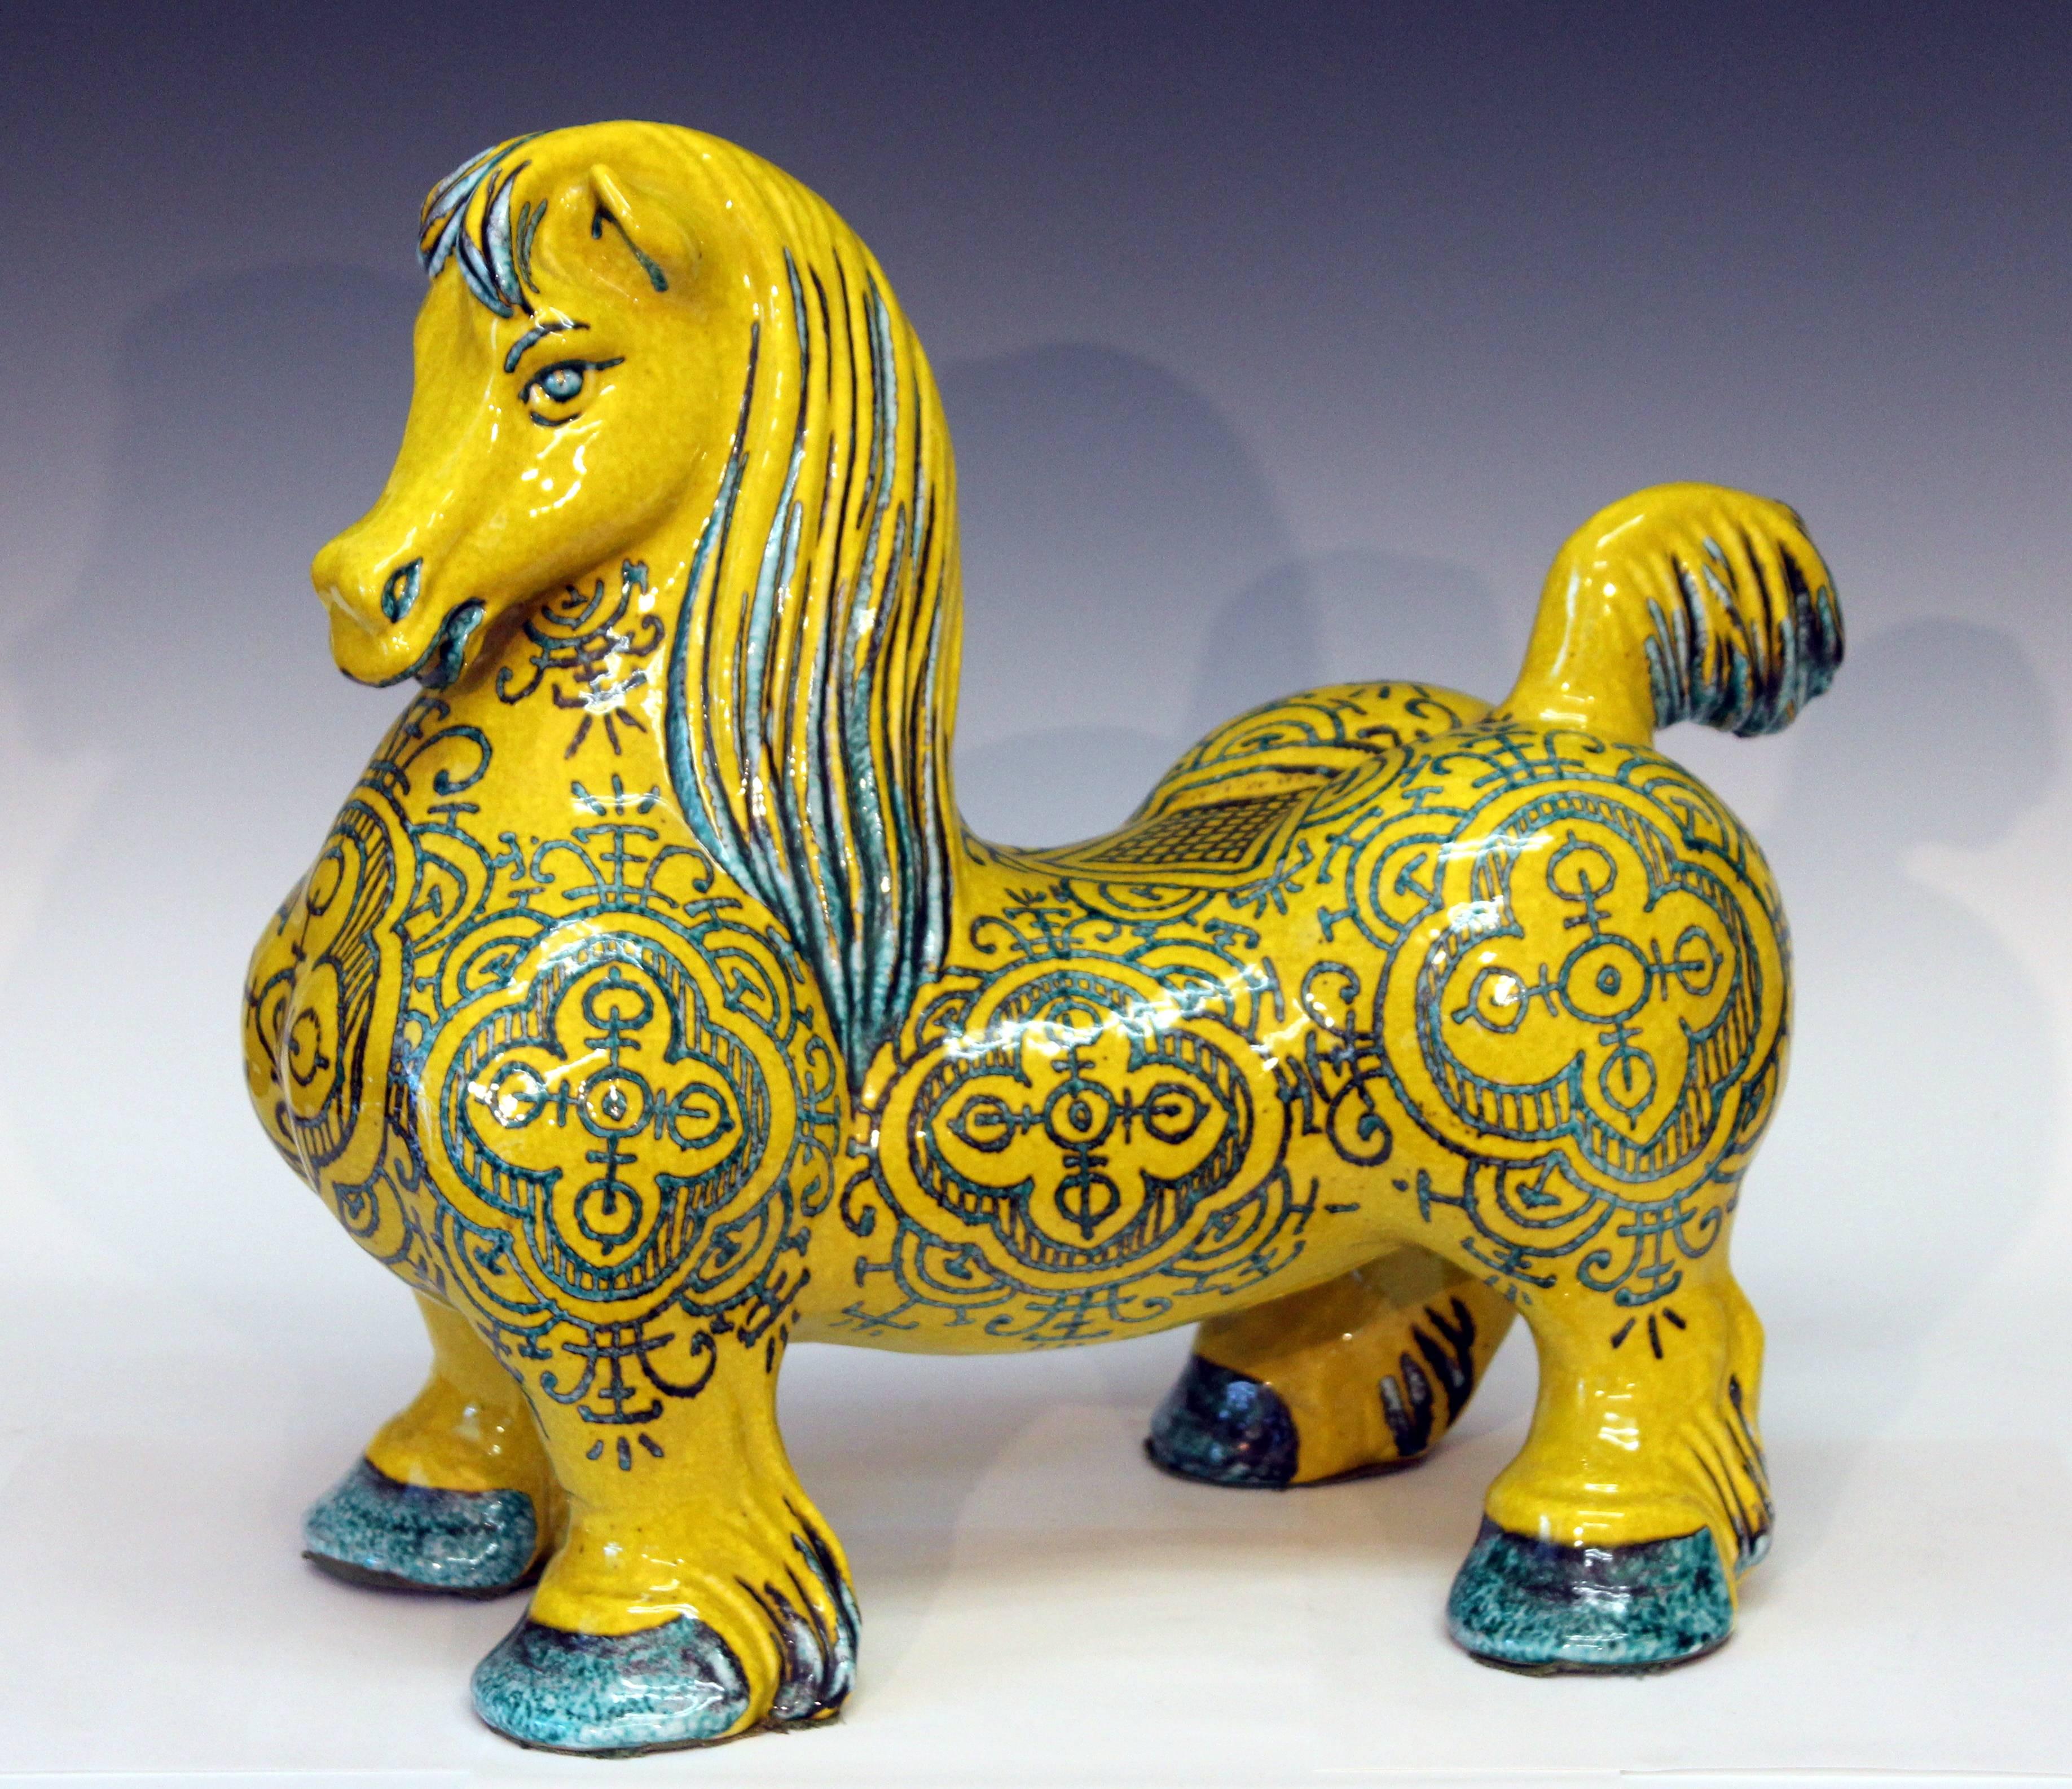 Large and heavy press molded vintage 1960s Italian pottery horse by the Mancioli Pottery, in Montelupo, outside of Florence. The muscular figure standing proud with elaborate design painted in a curious fugitive green glaze over bright yellow. This